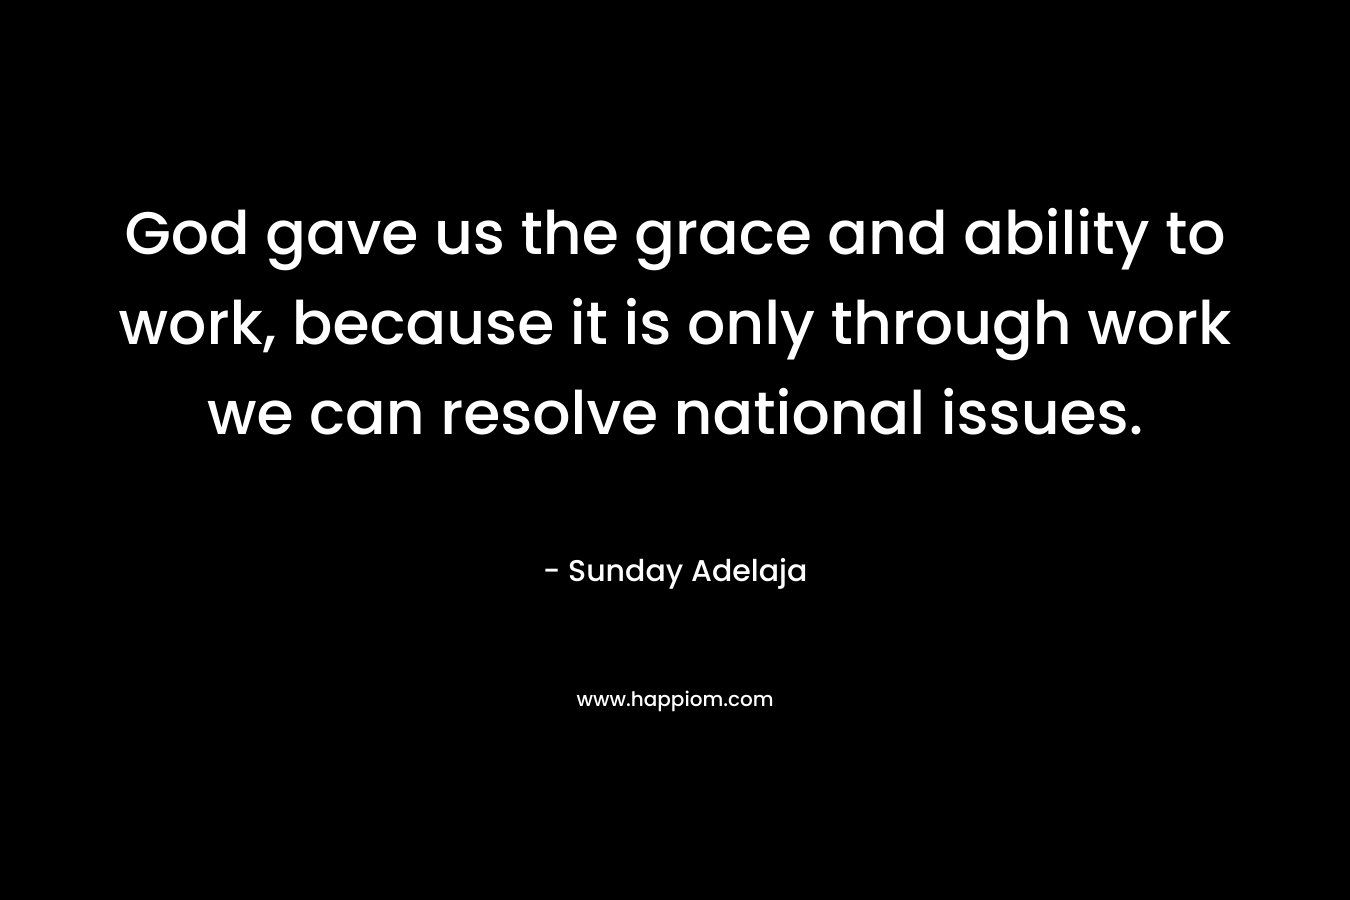 God gave us the grace and ability to work, because it is only through work we can resolve national issues.